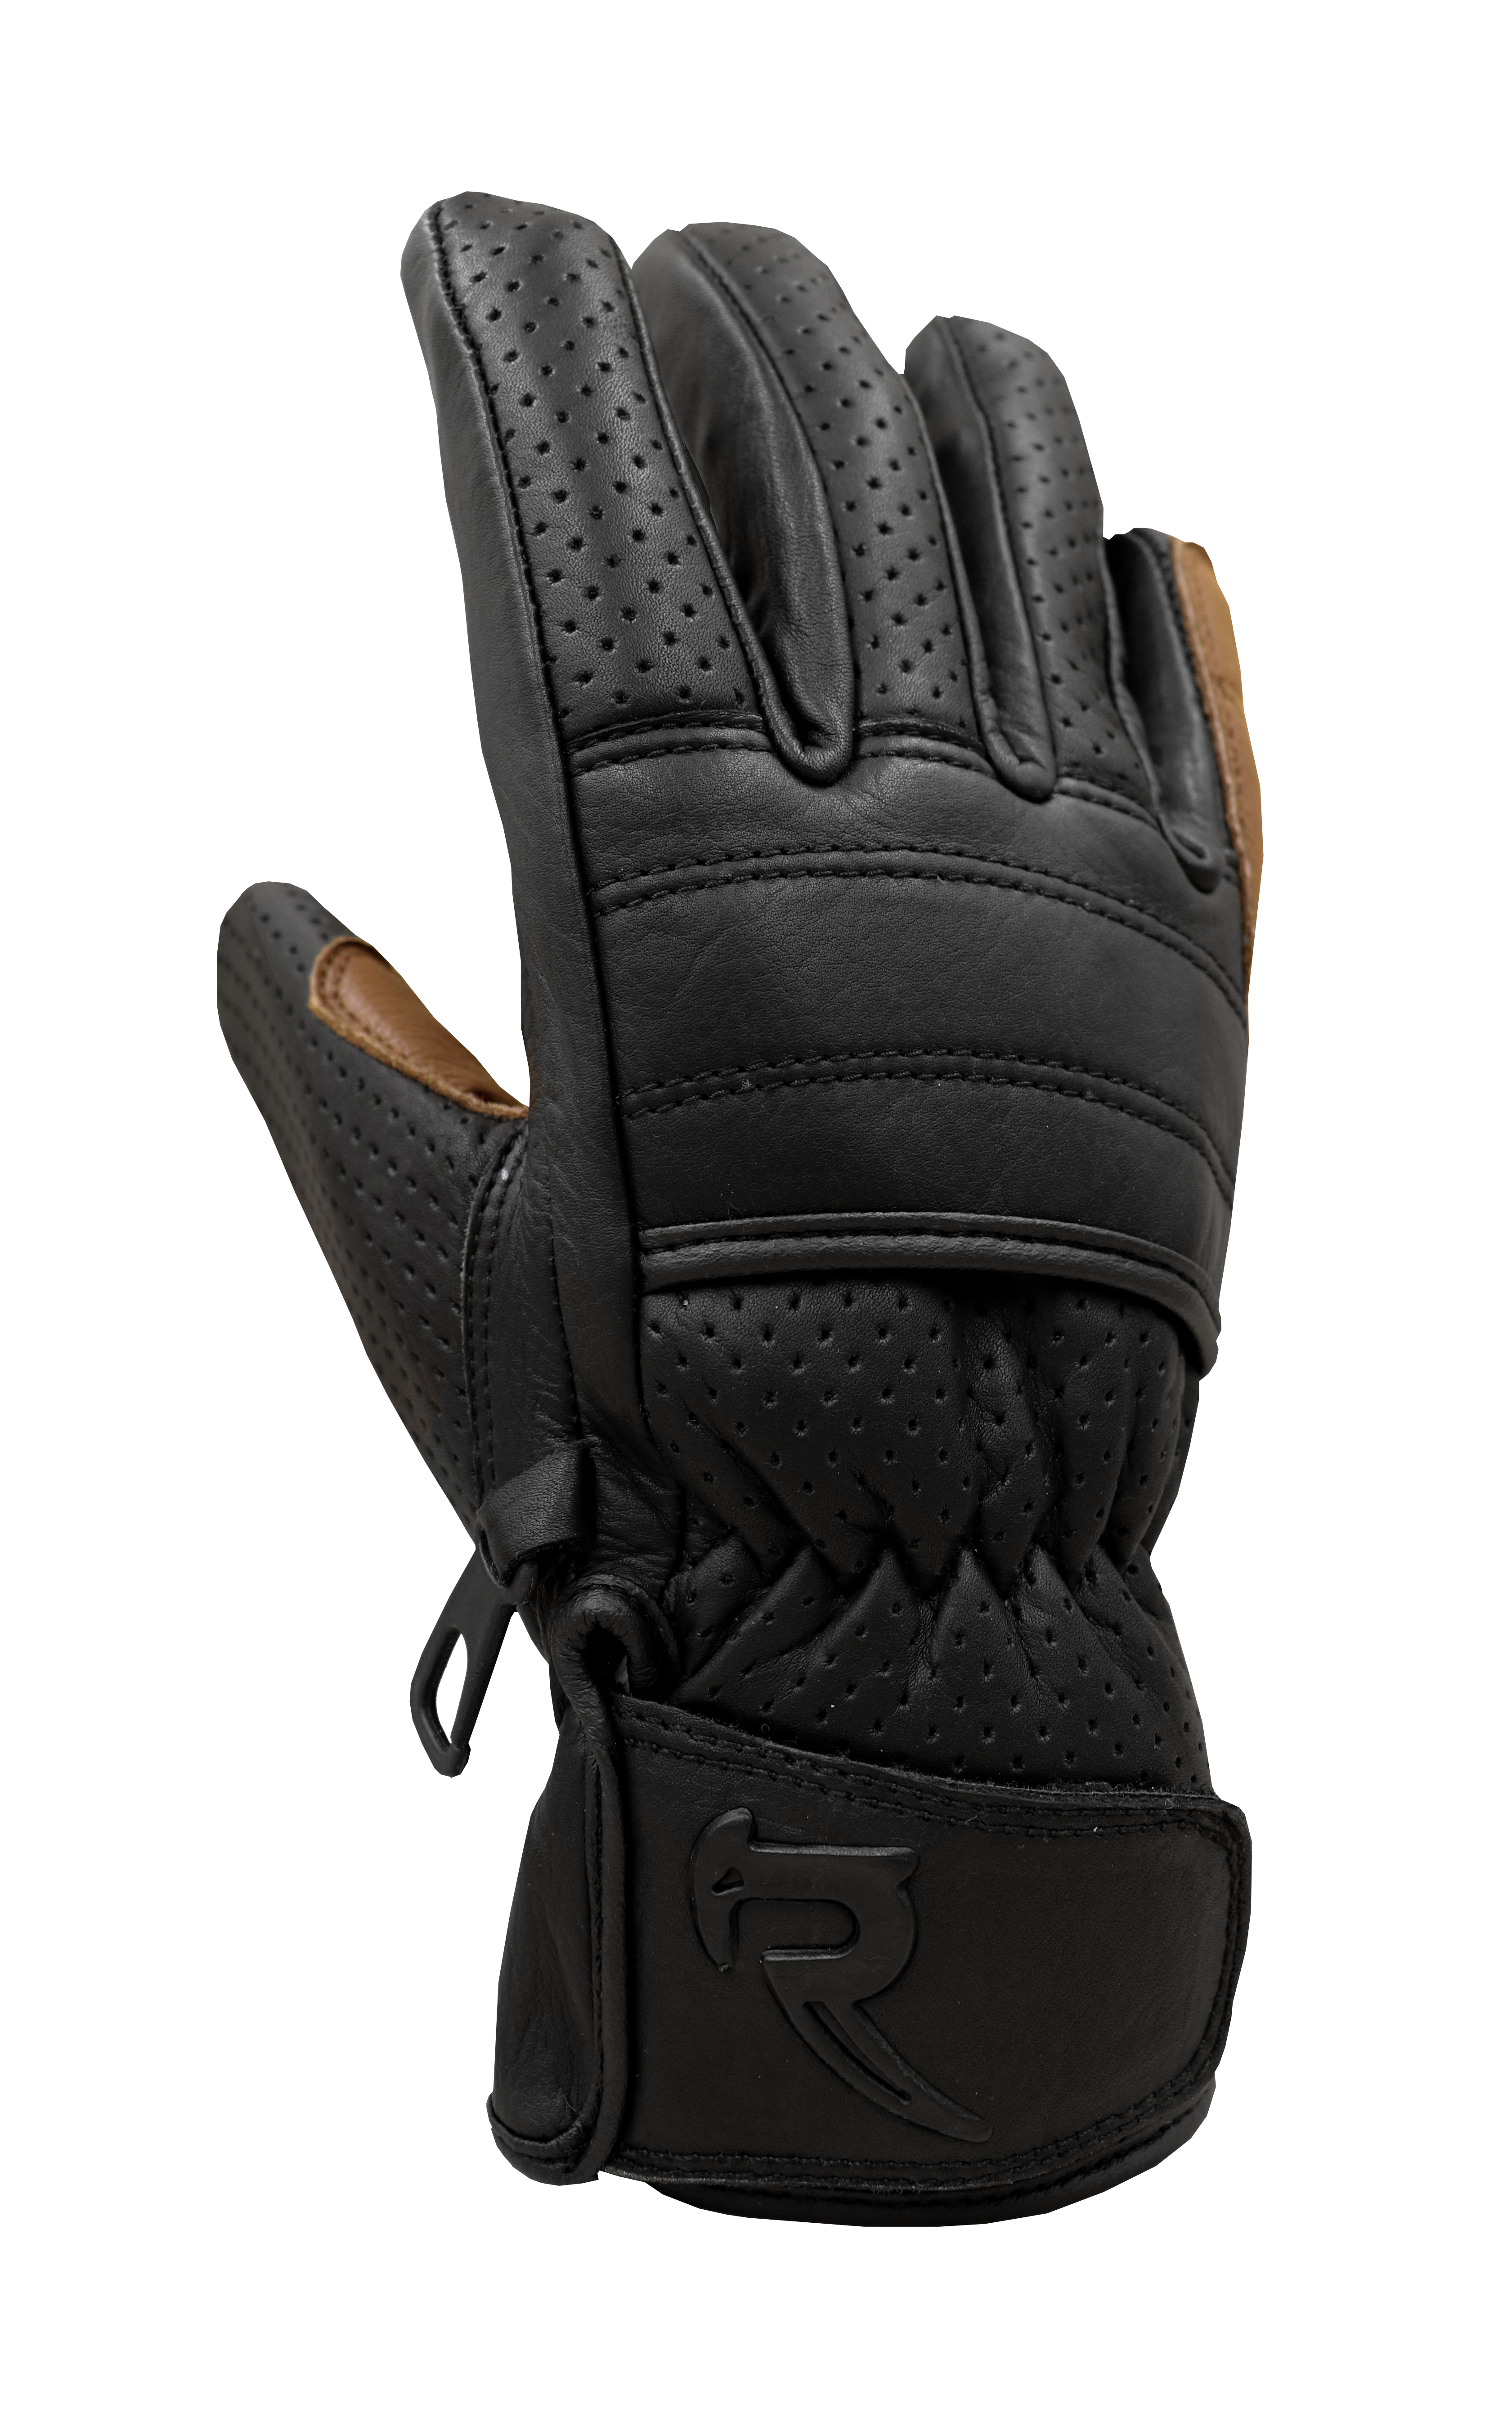 SHIFT - Tan and Black Leather Motorcycle Short Cuff Glove by RAVEN Moto. Ideal for cafe racers and cruiser motorbikes.